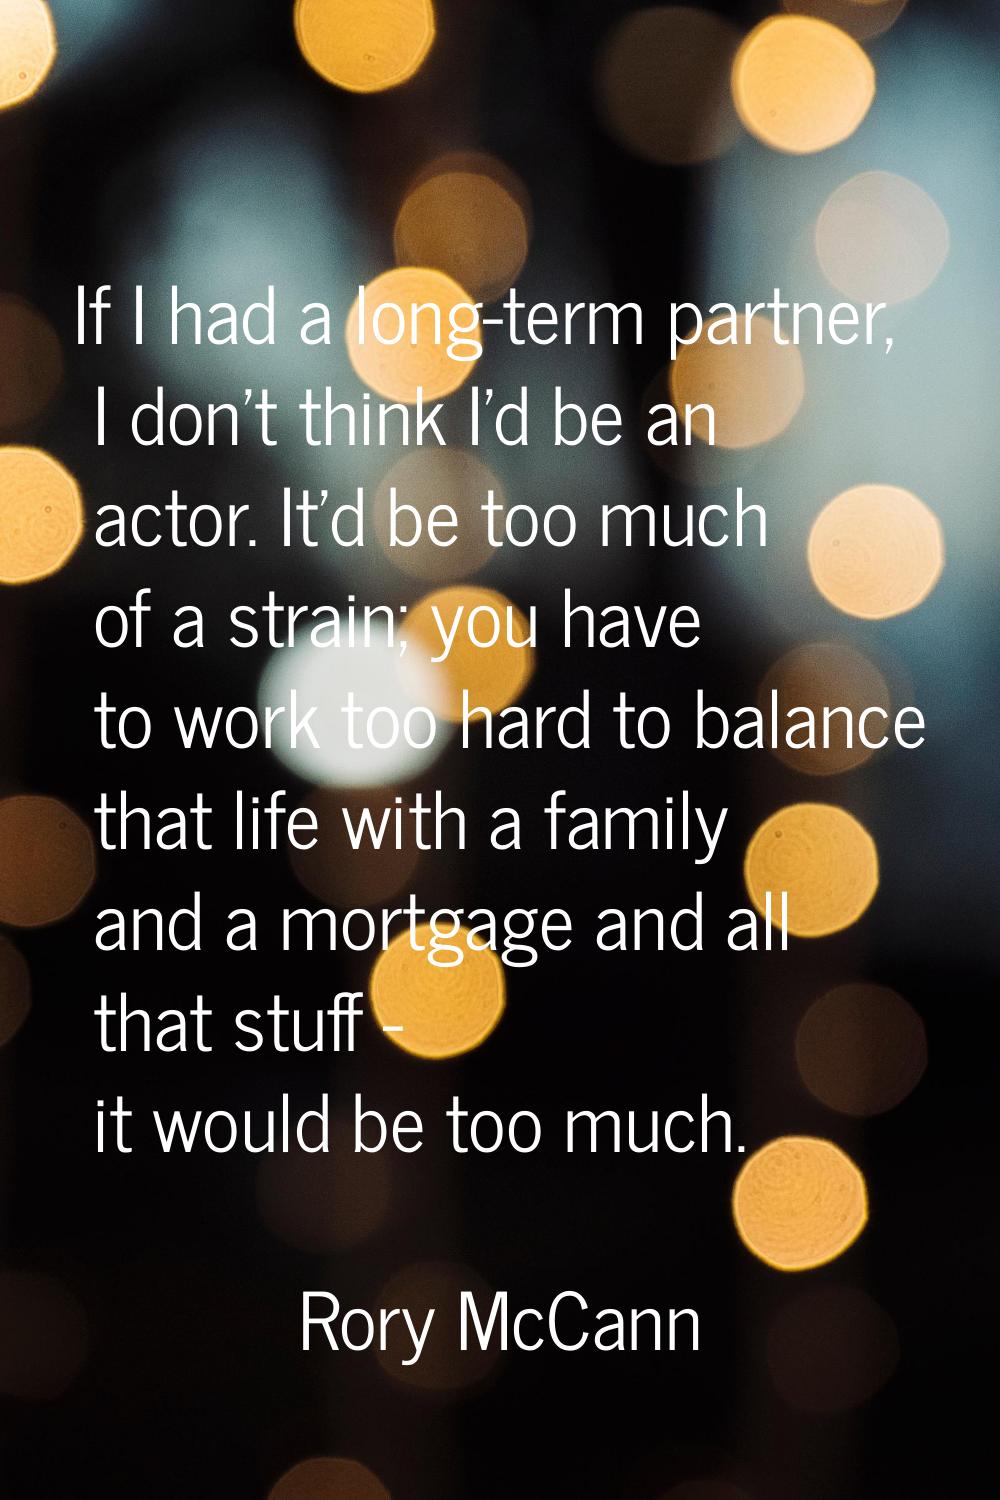 If I had a long-term partner, I don't think I'd be an actor. It'd be too much of a strain; you have